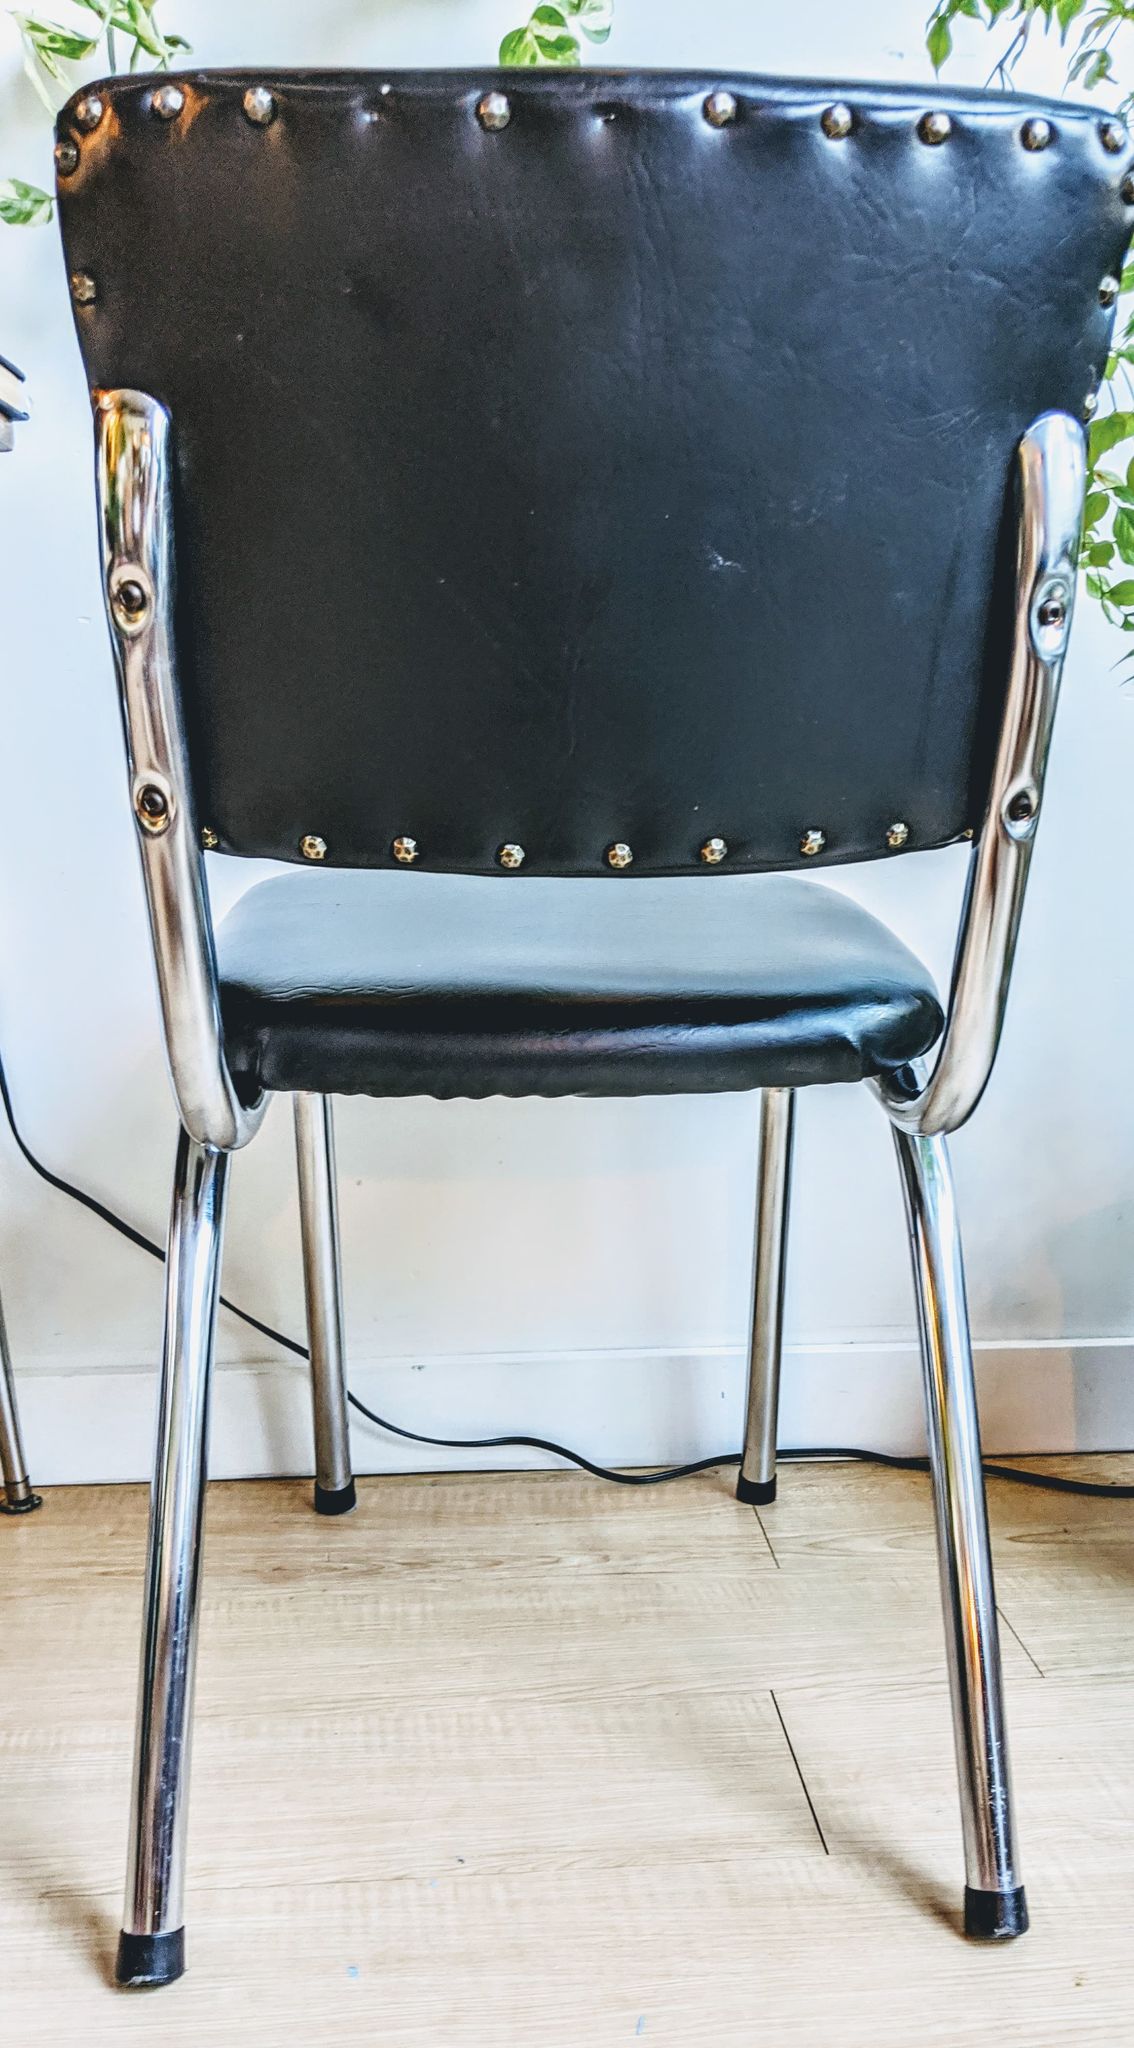 50s barbershop style chairs black leather